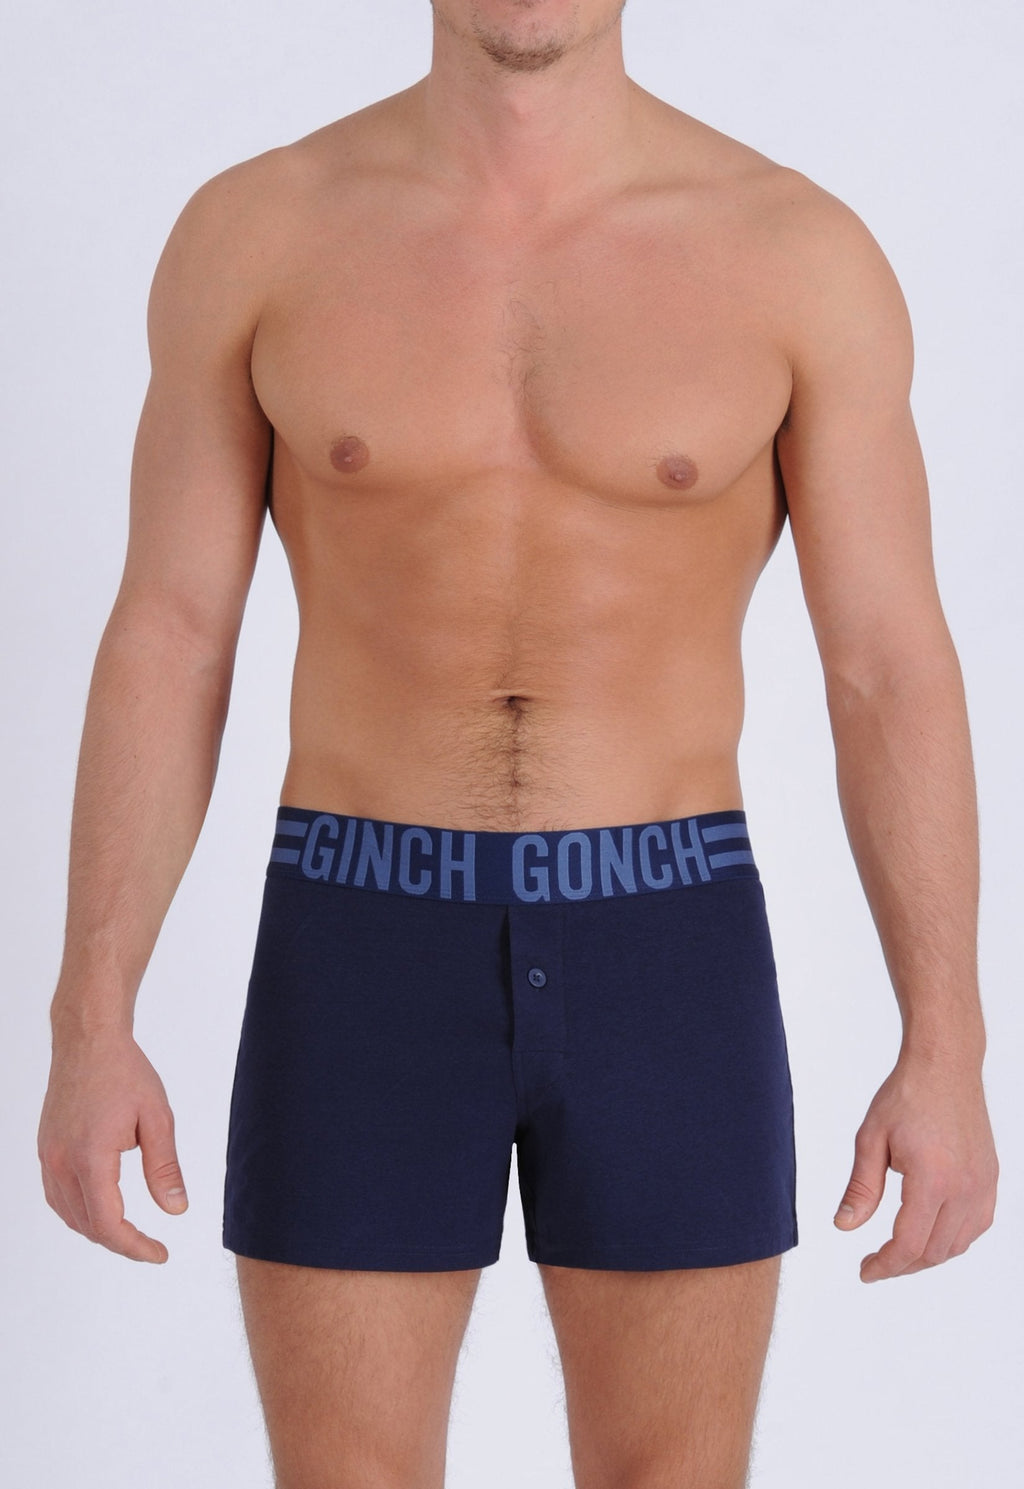 Ginch Gonch Men's Signature Series - Boxer Shorts - Navy button front boxers front